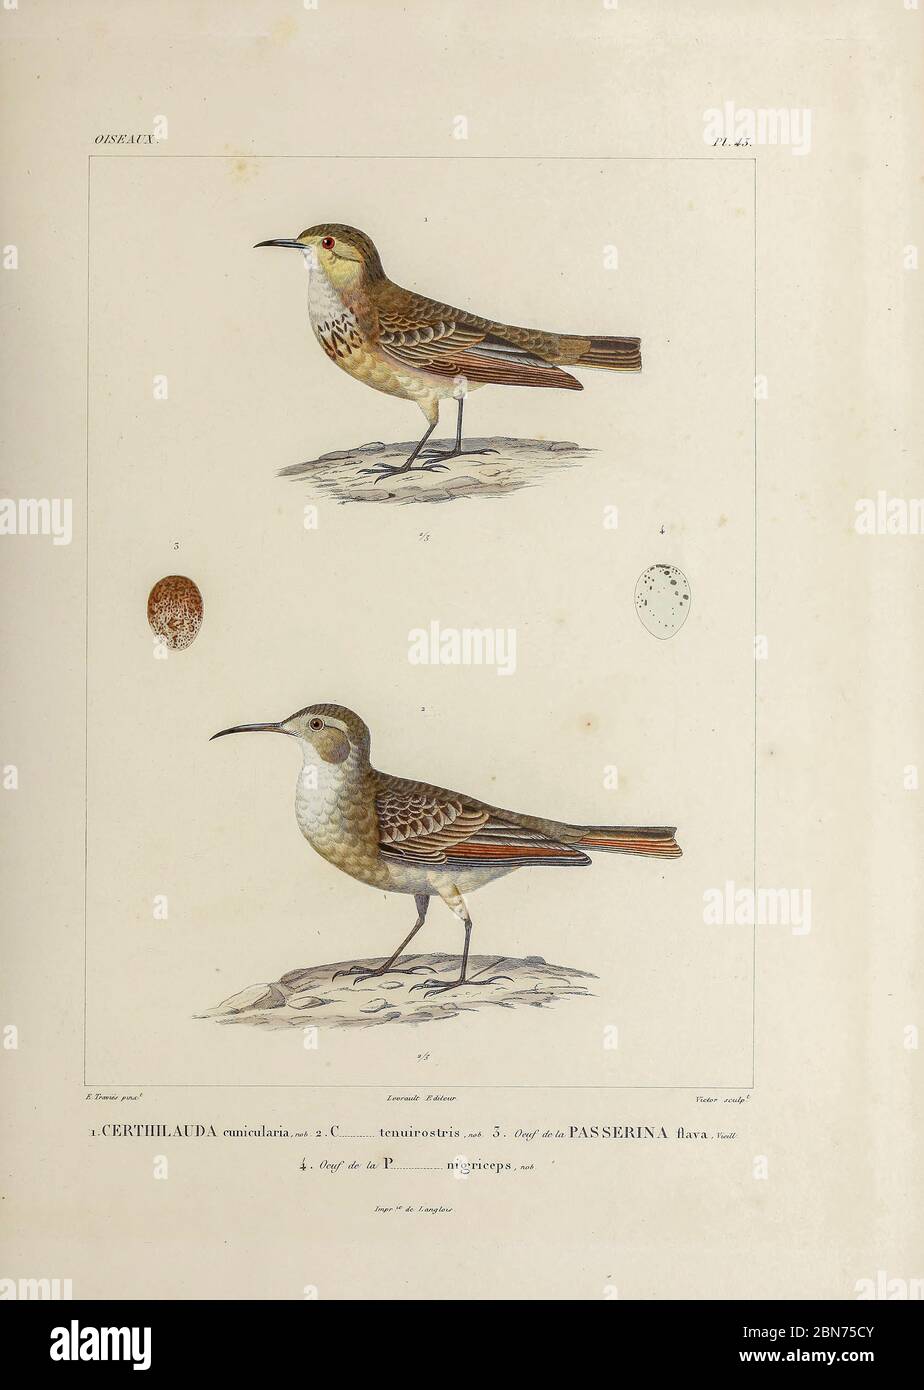 hand coloured sketch Top: Subspecies of Common Miner (Geositta cunicularia cunicularia [Here as Certhilauda cunicularia]) Bottom: Subspecies of Slender-billed Miner (Geositta tenuirostris tenuirostris [Here as Certhilauda tenuirostris]) From the book 'Voyage dans l'Amérique Méridionale' [Journey to South America: (Brazil, the eastern republic of Uruguay, the Argentine Republic, Patagonia, the republic of Chile, the republic of Bolivia, the republic of Peru), executed during the years 1826 - 1833] 4th volume Part 3 By: Orbigny, Alcide Dessalines d', d'Orbigny, 1802-1857; Montagne, Jean Françoi Stock Photo